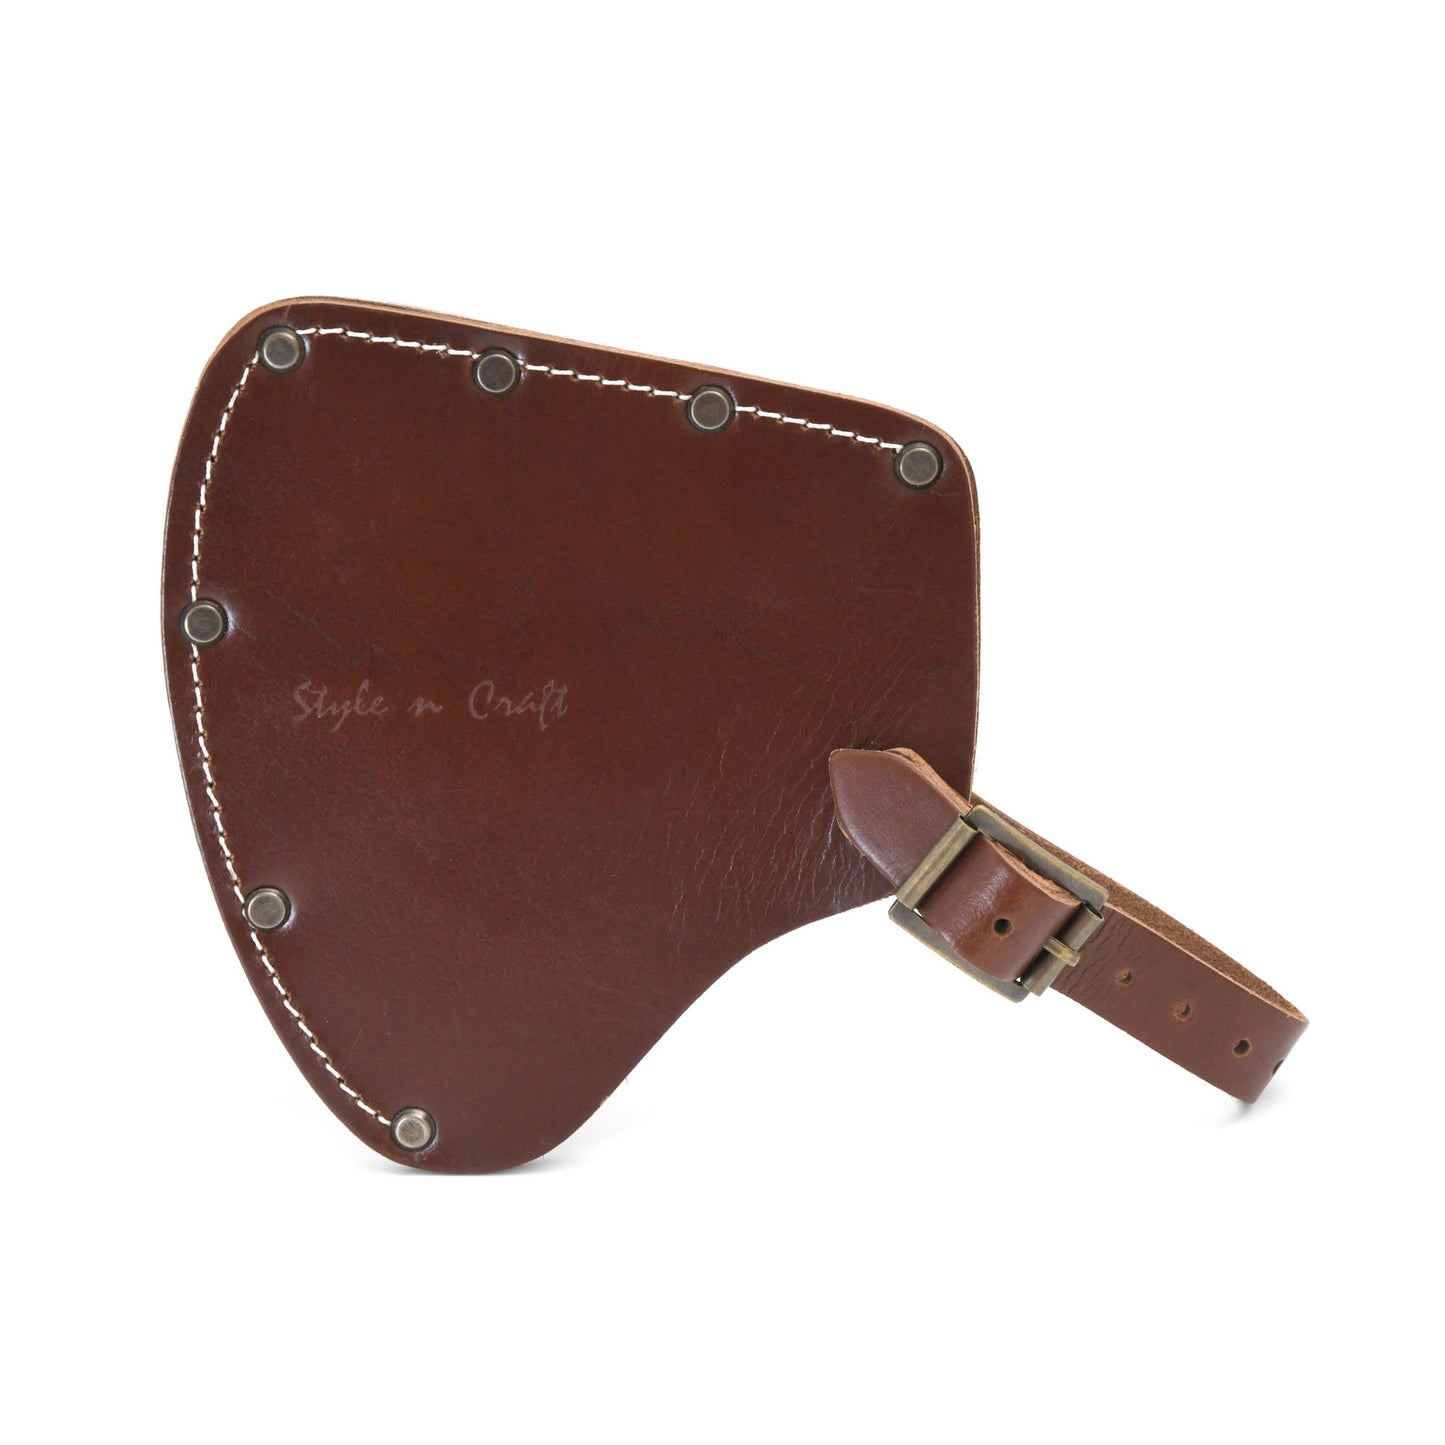 Style n Craft 98027 - Camper's Axe Sheath / Cover in Heavy Full Grain Leather in Dark Tan Color with a Strap and Buckle Closure - Front View